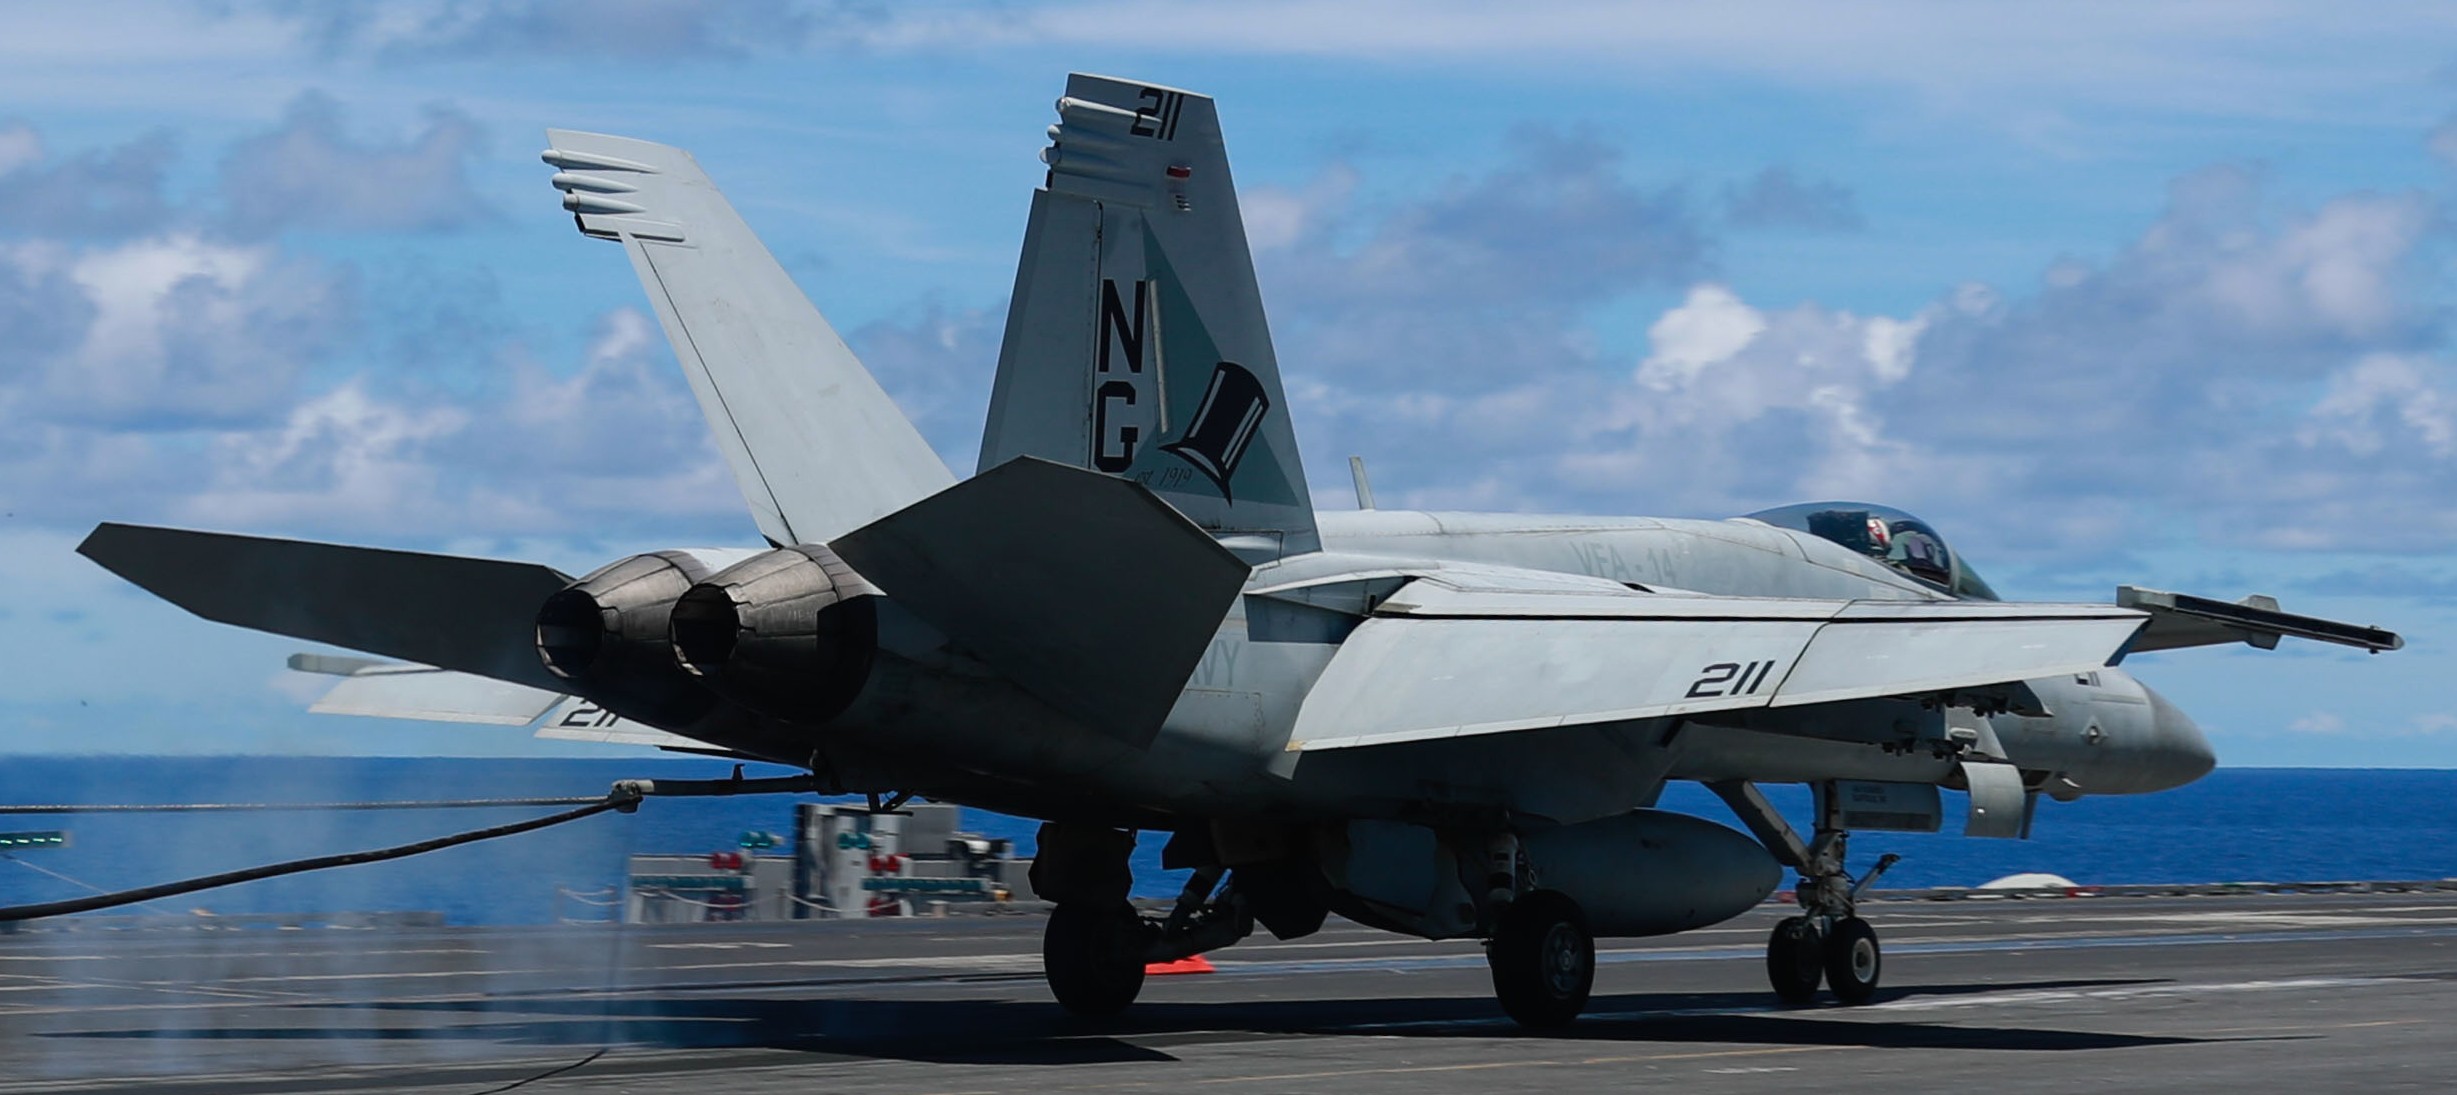 vfa-14 tophatters strike fighter squadron f/a-18e super hornet cvn-72 uss abraham lincoln cvw-9 us navy 86